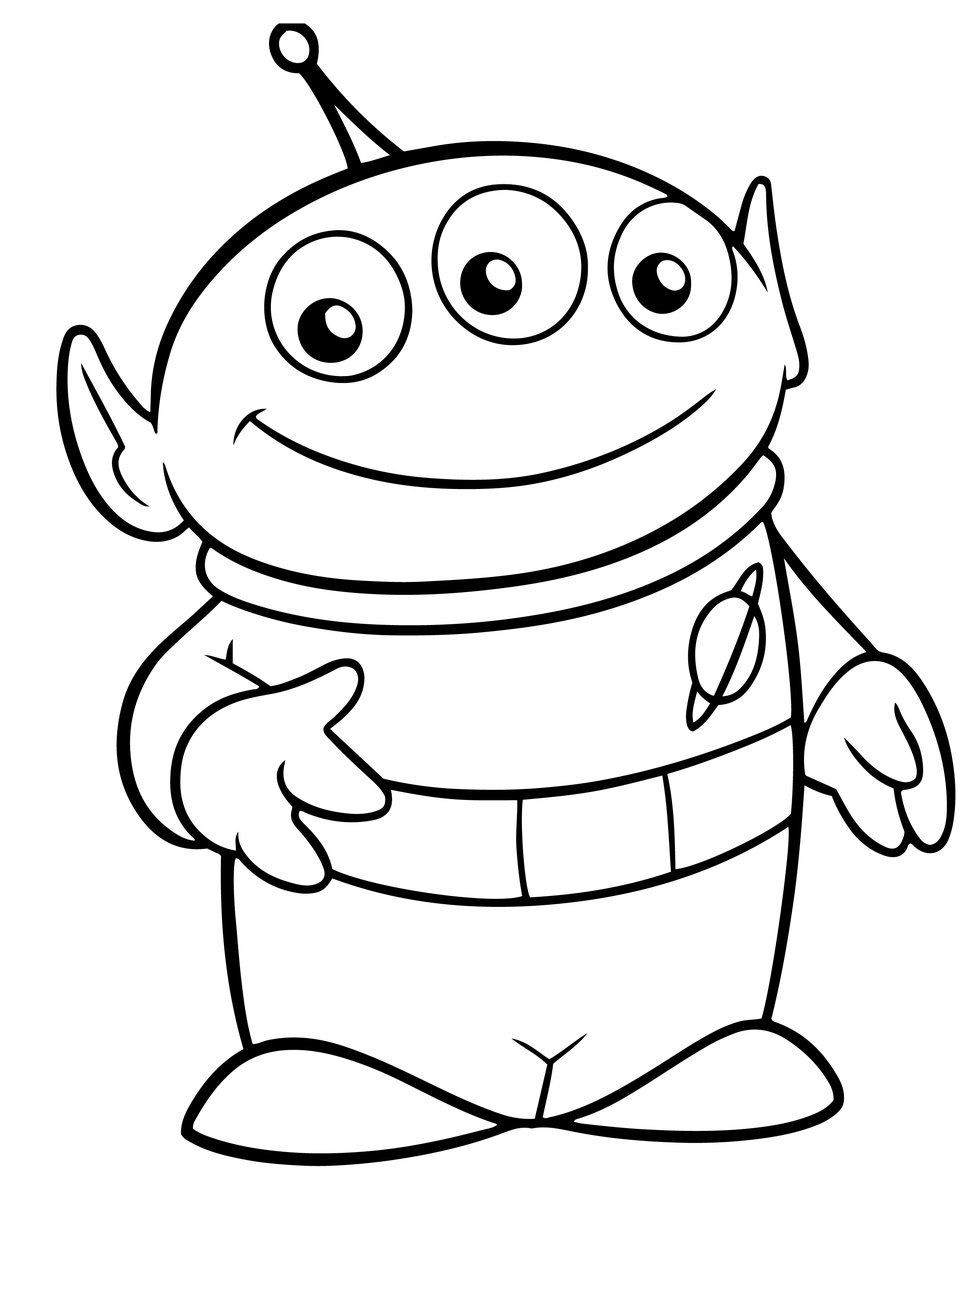 Toy Story Alien Coloring Page.